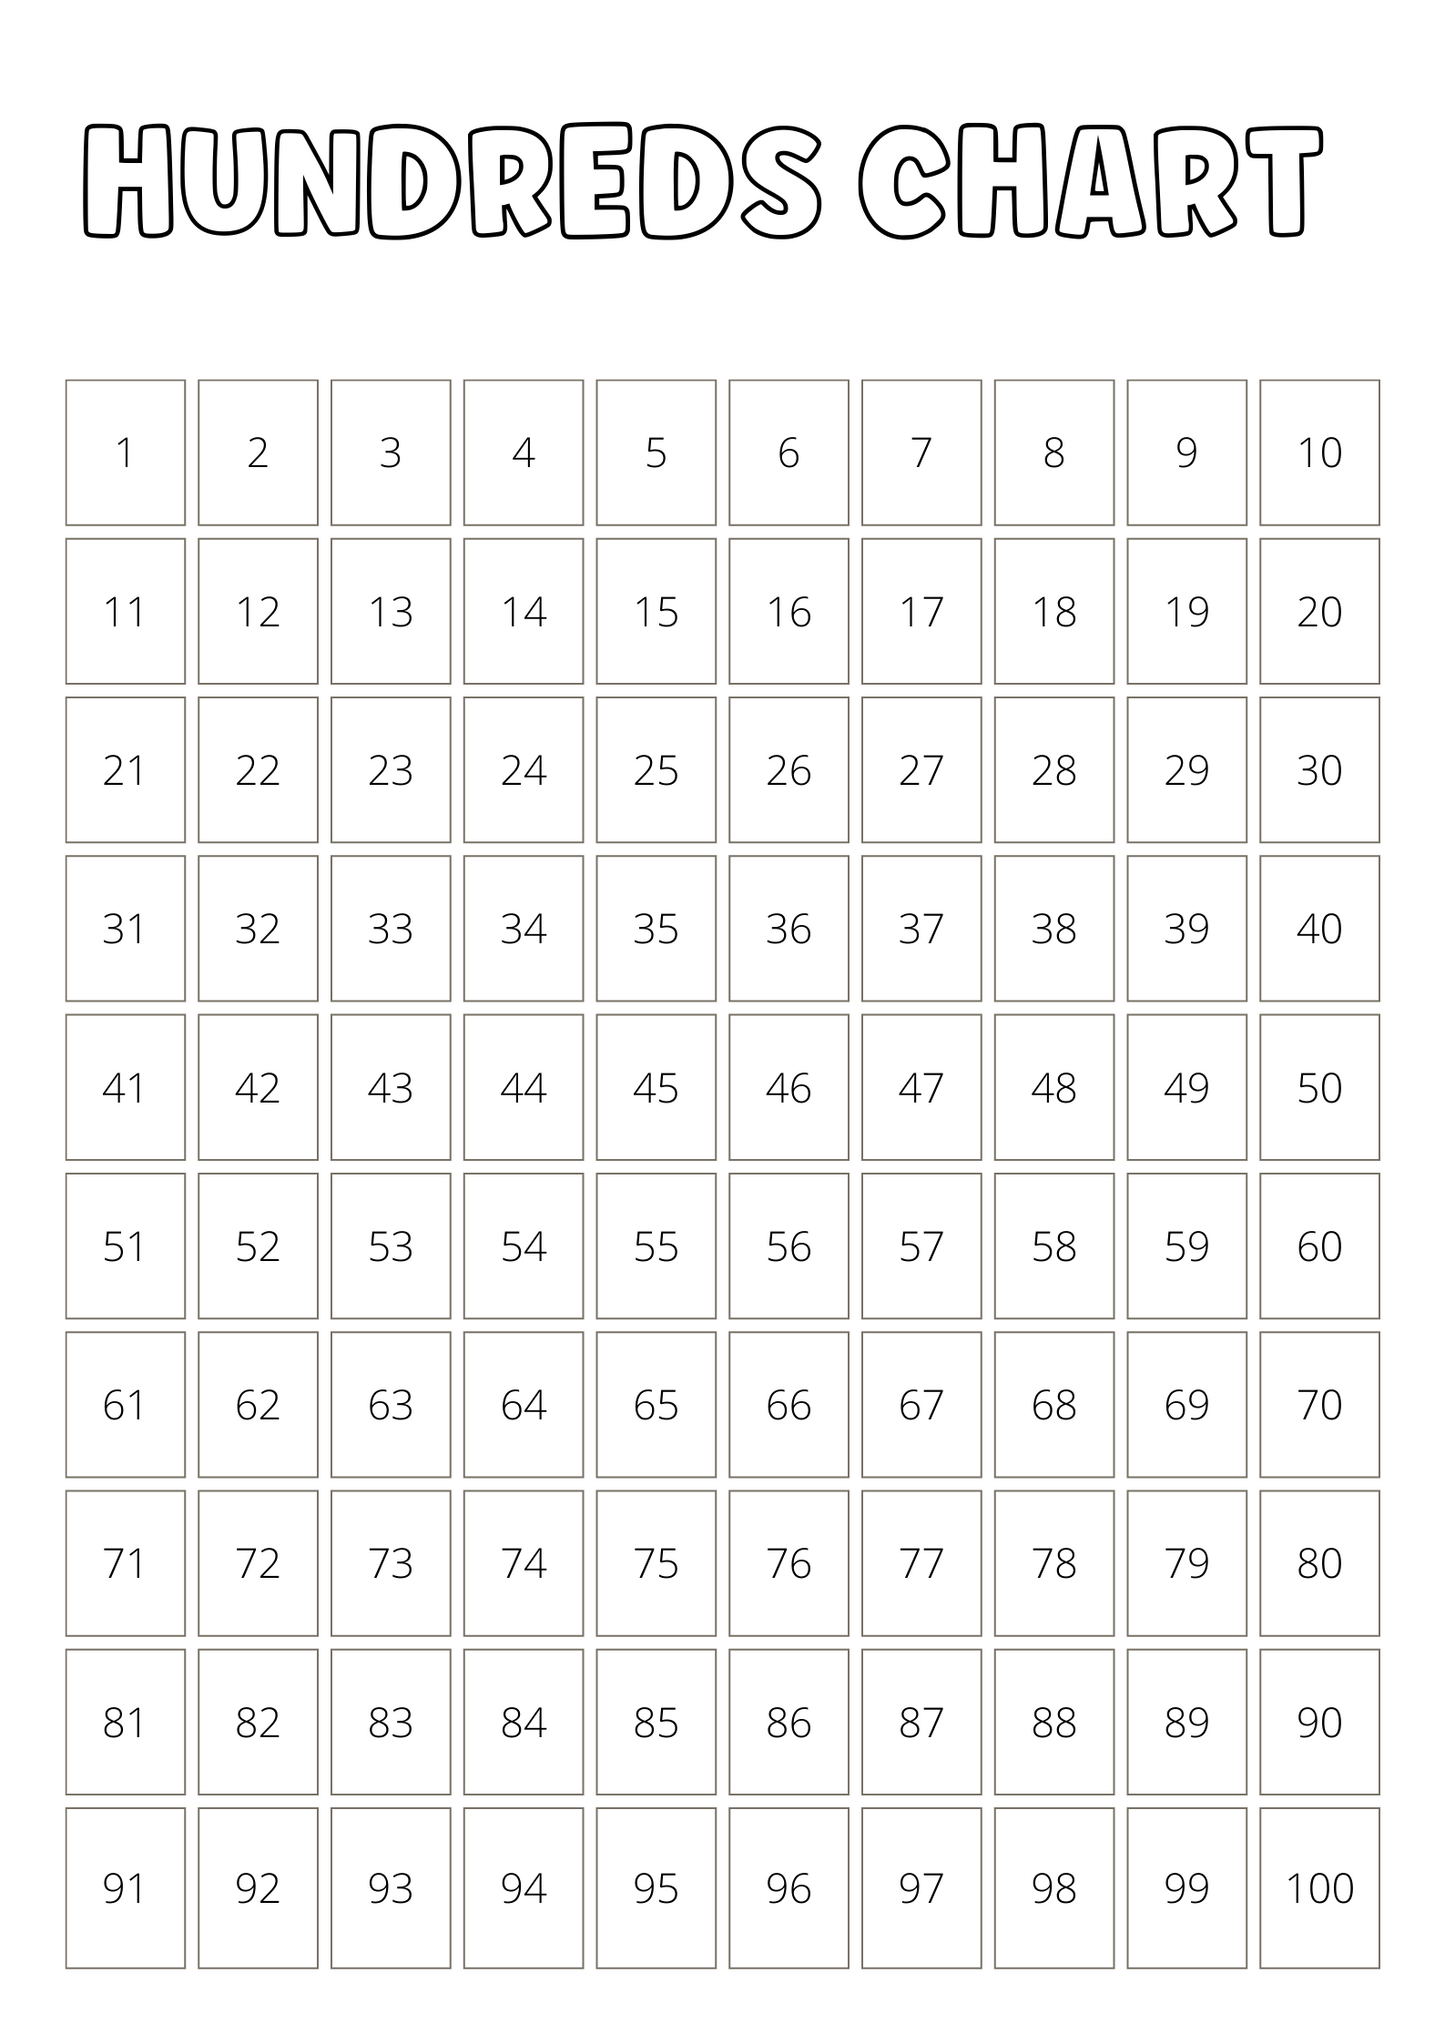 Hundreds and Multiplication Chart